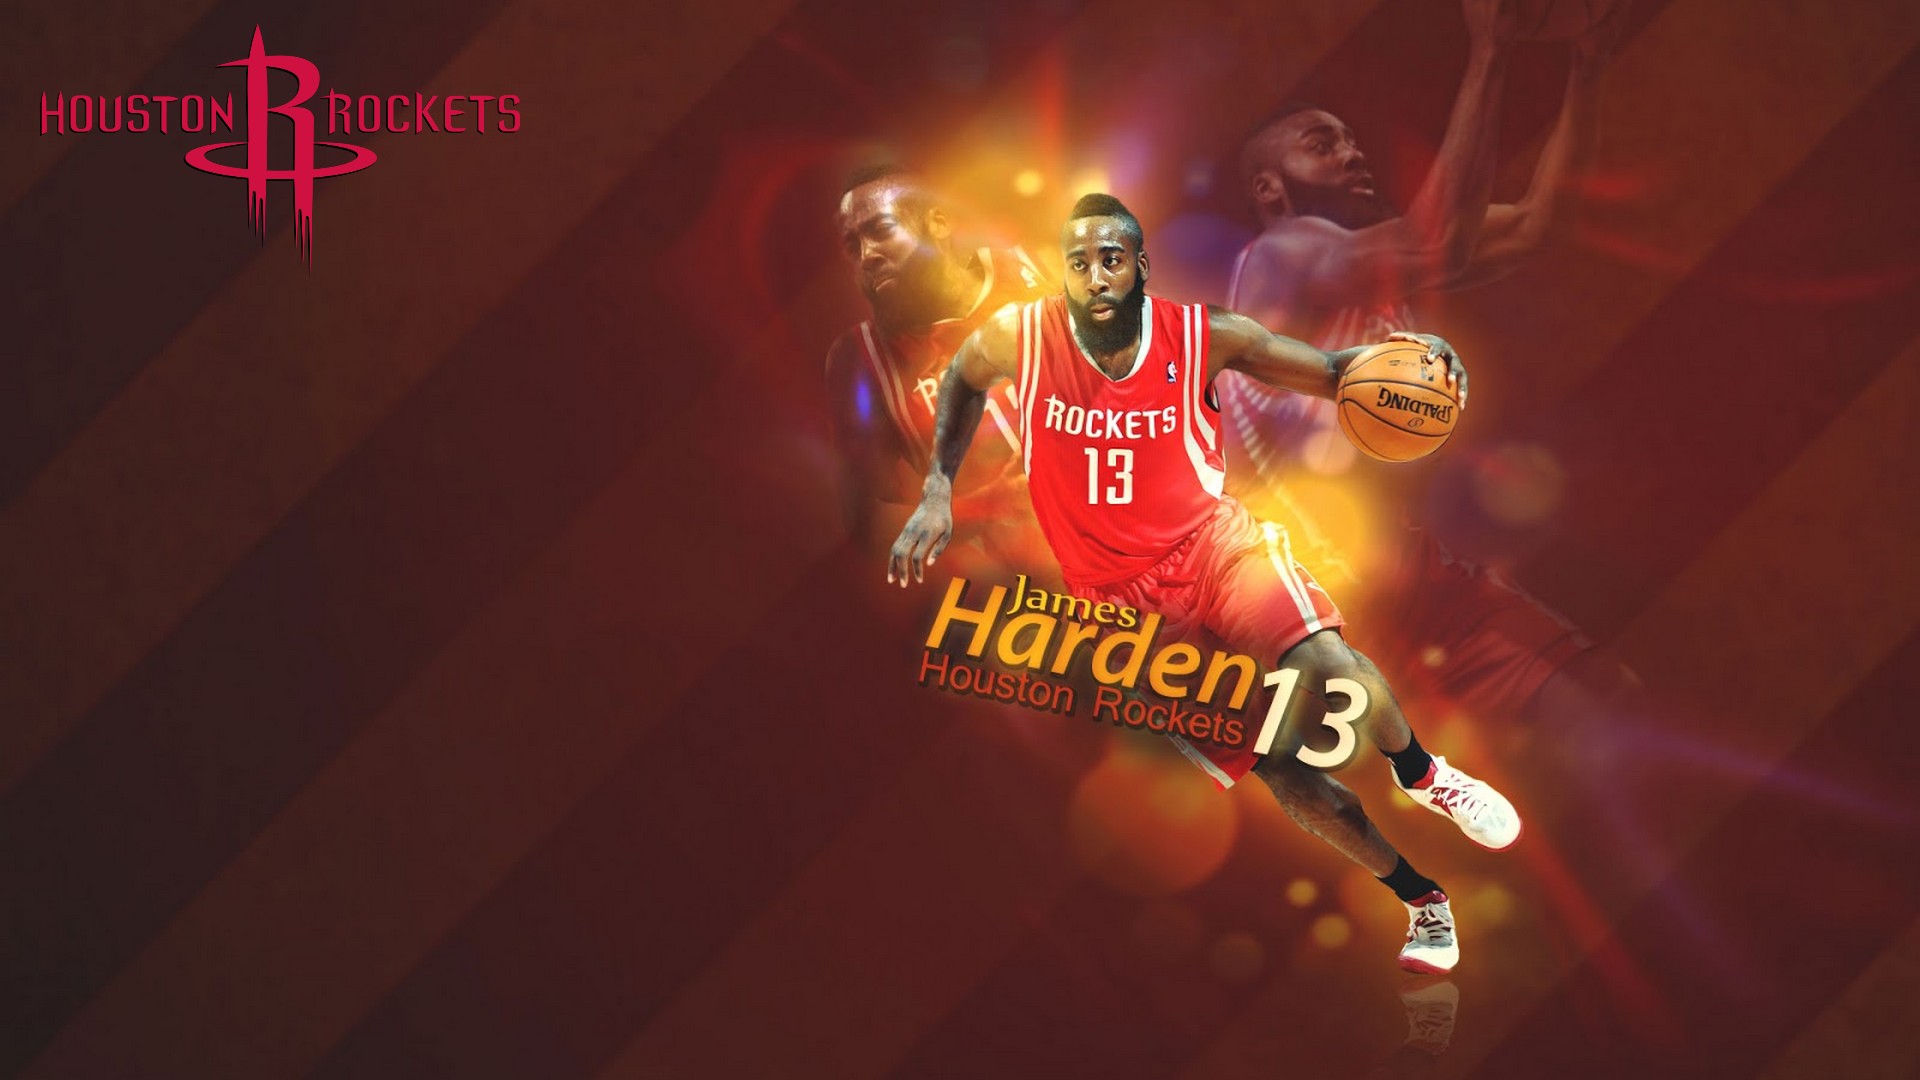 Windows Wallpaper James Harden with image dimensions 1920x1080 pixel. You can make this wallpaper for your Desktop Computer Backgrounds, Windows or Mac Screensavers, iPhone Lock screen, Tablet or Android and another Mobile Phone device